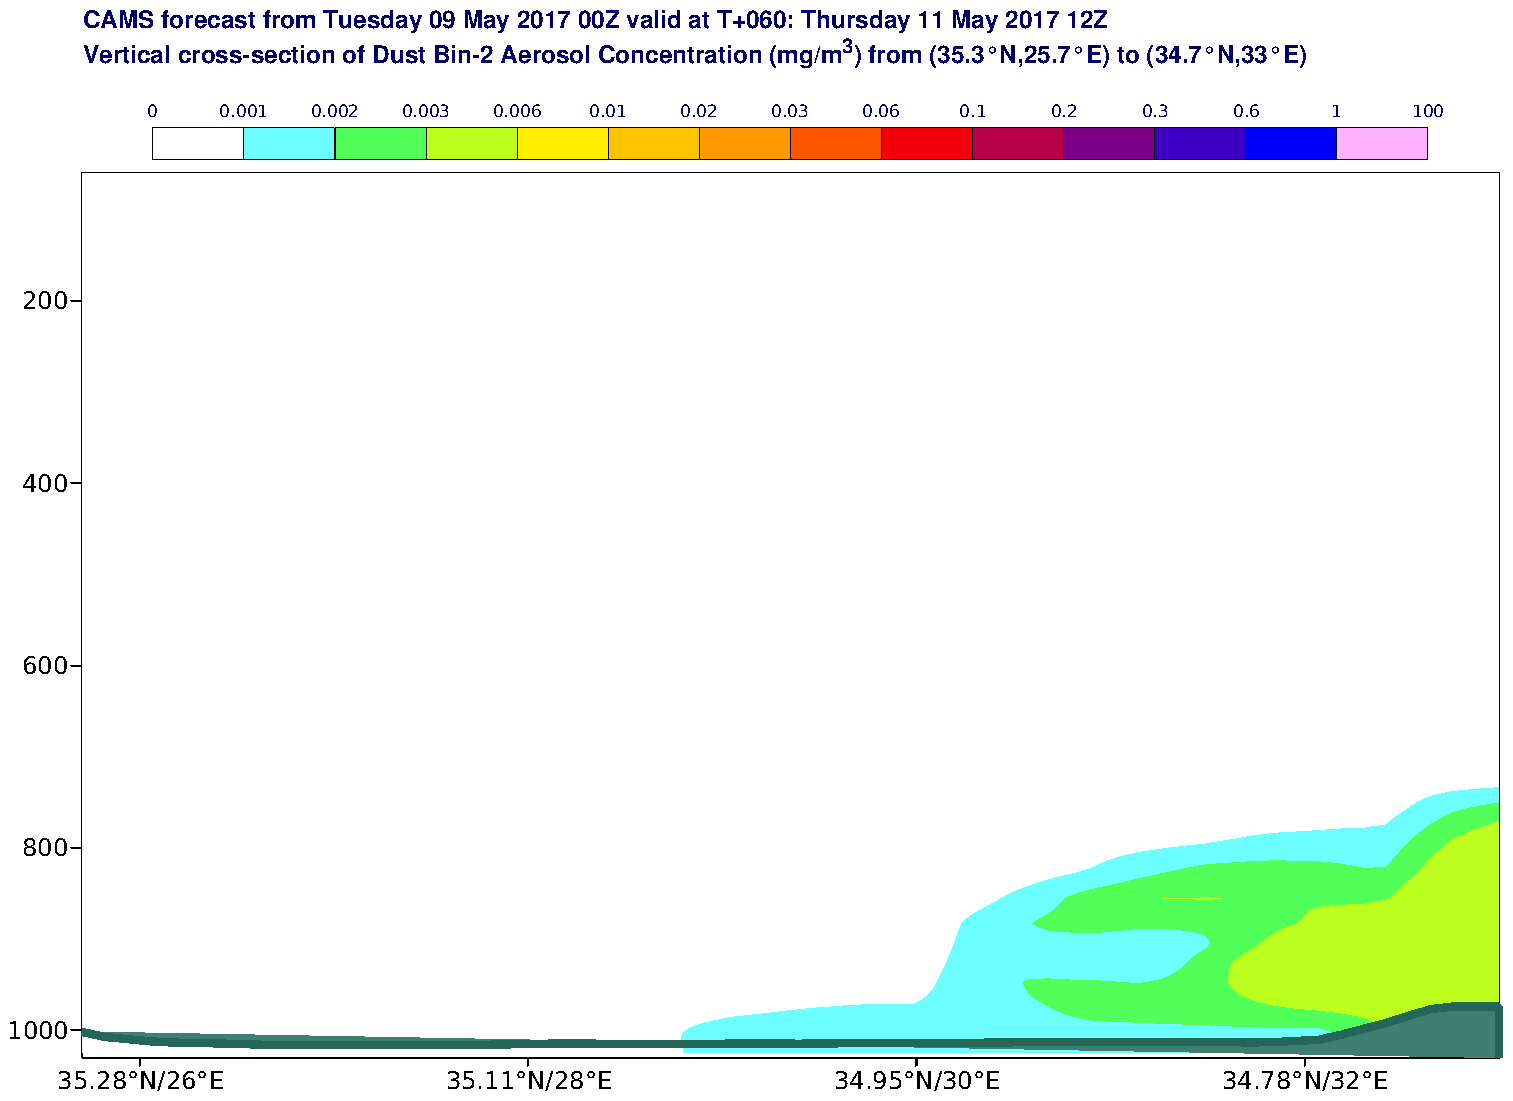 Vertical cross-section of Dust Bin-2 Aerosol Concentration (mg/m3) valid at T60 - 2017-05-11 12:00